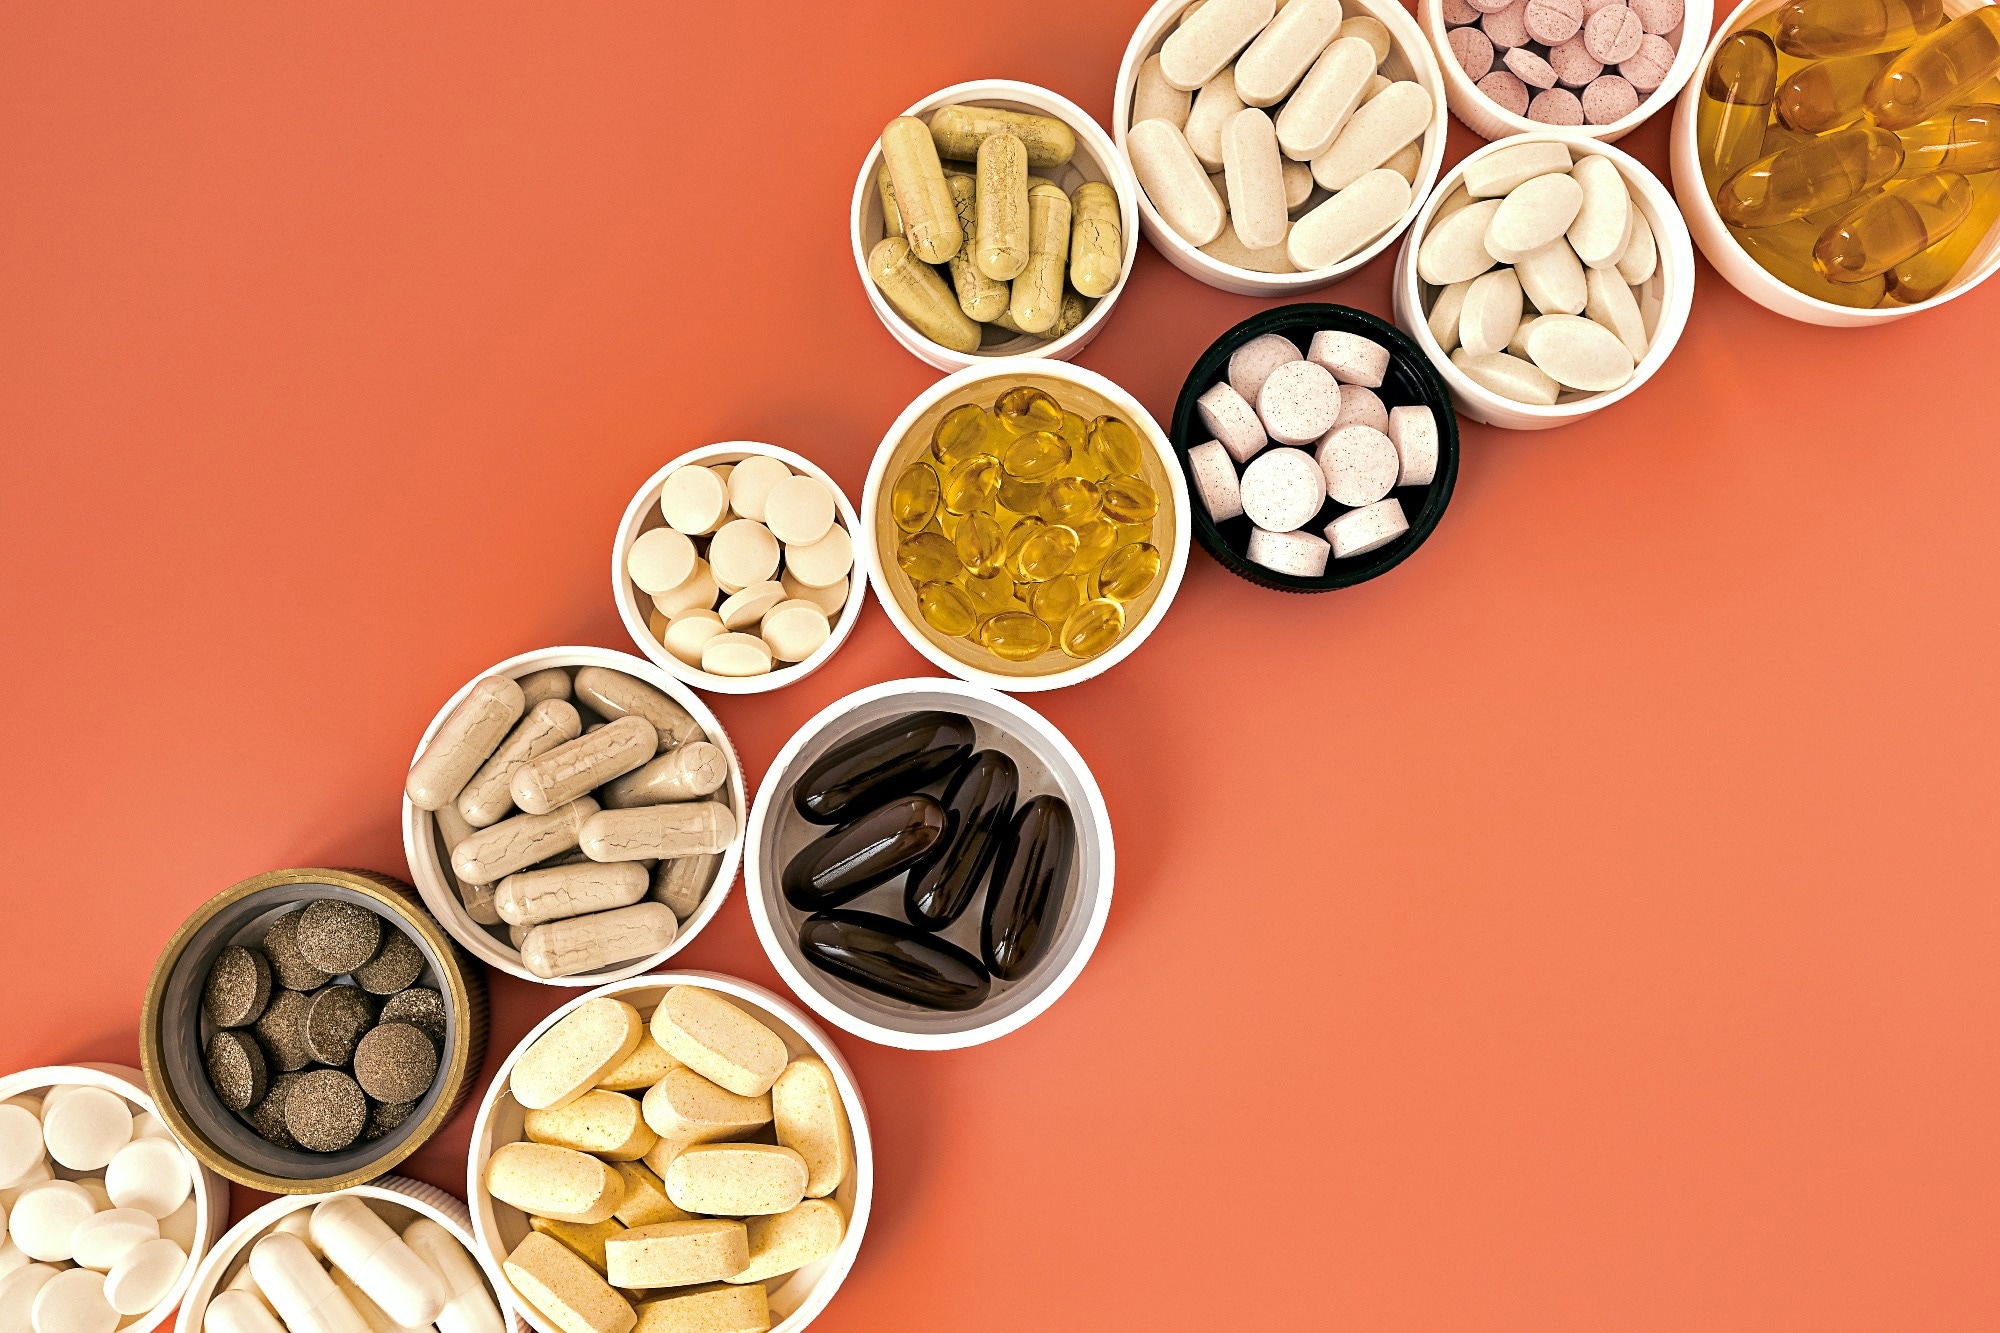 Study: Multivitamin supplementation improves memory in older adults: a randomized clinical trial. Image Credit: photo_gonzo / Shutterstock.com